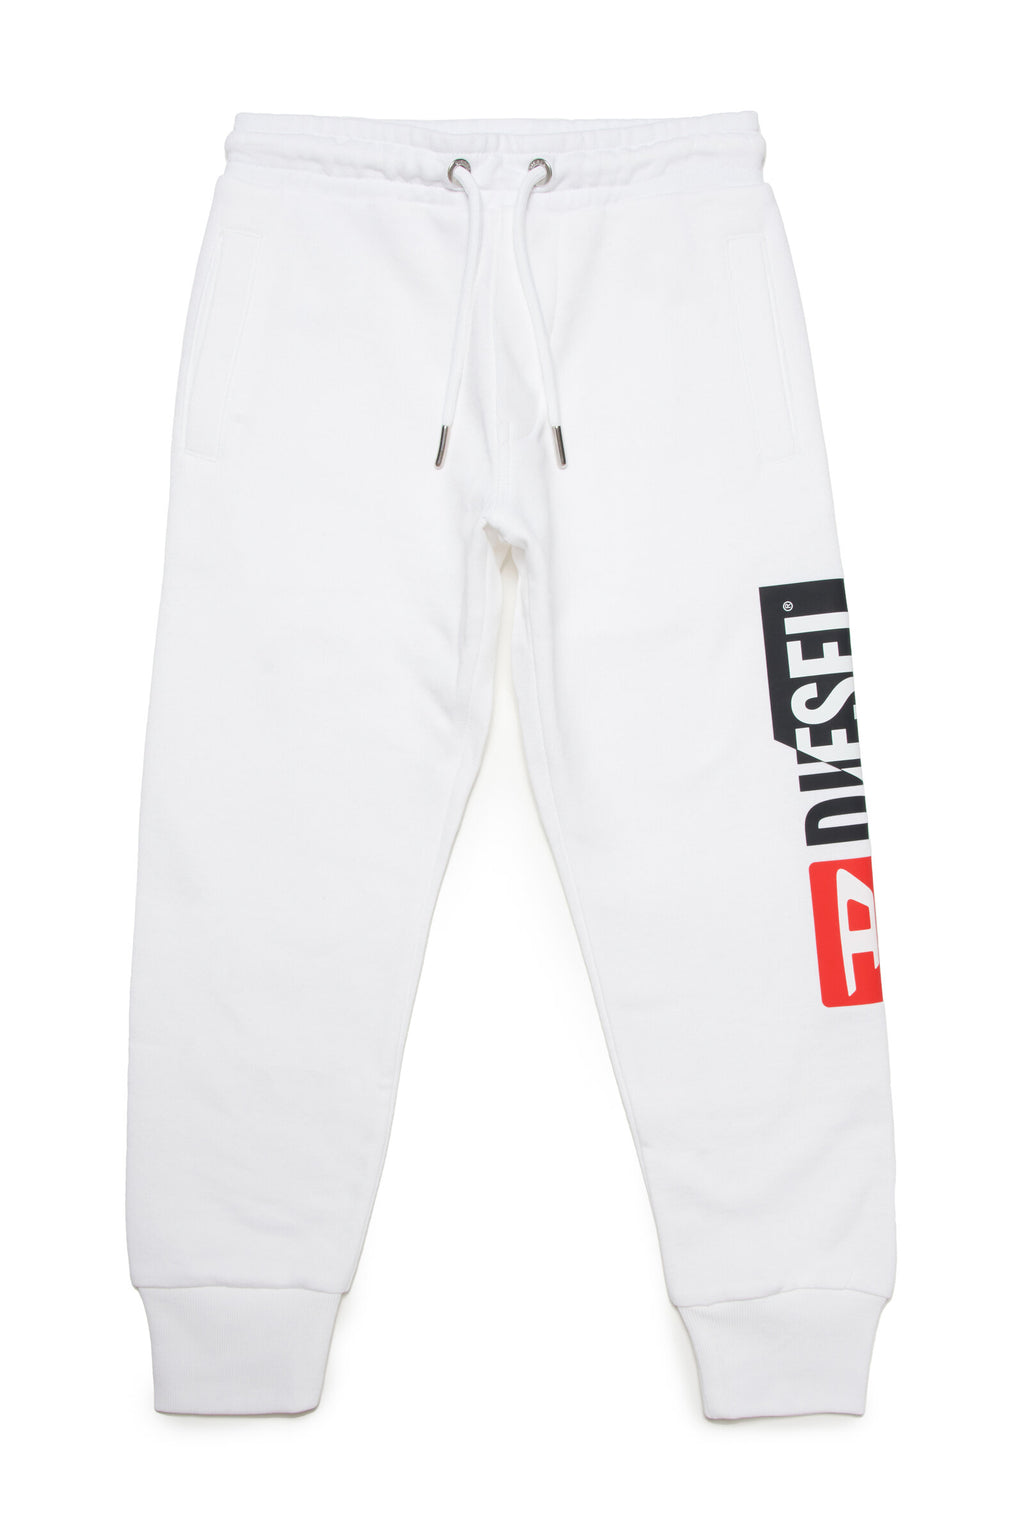 White jogger pants with Diesel double logo